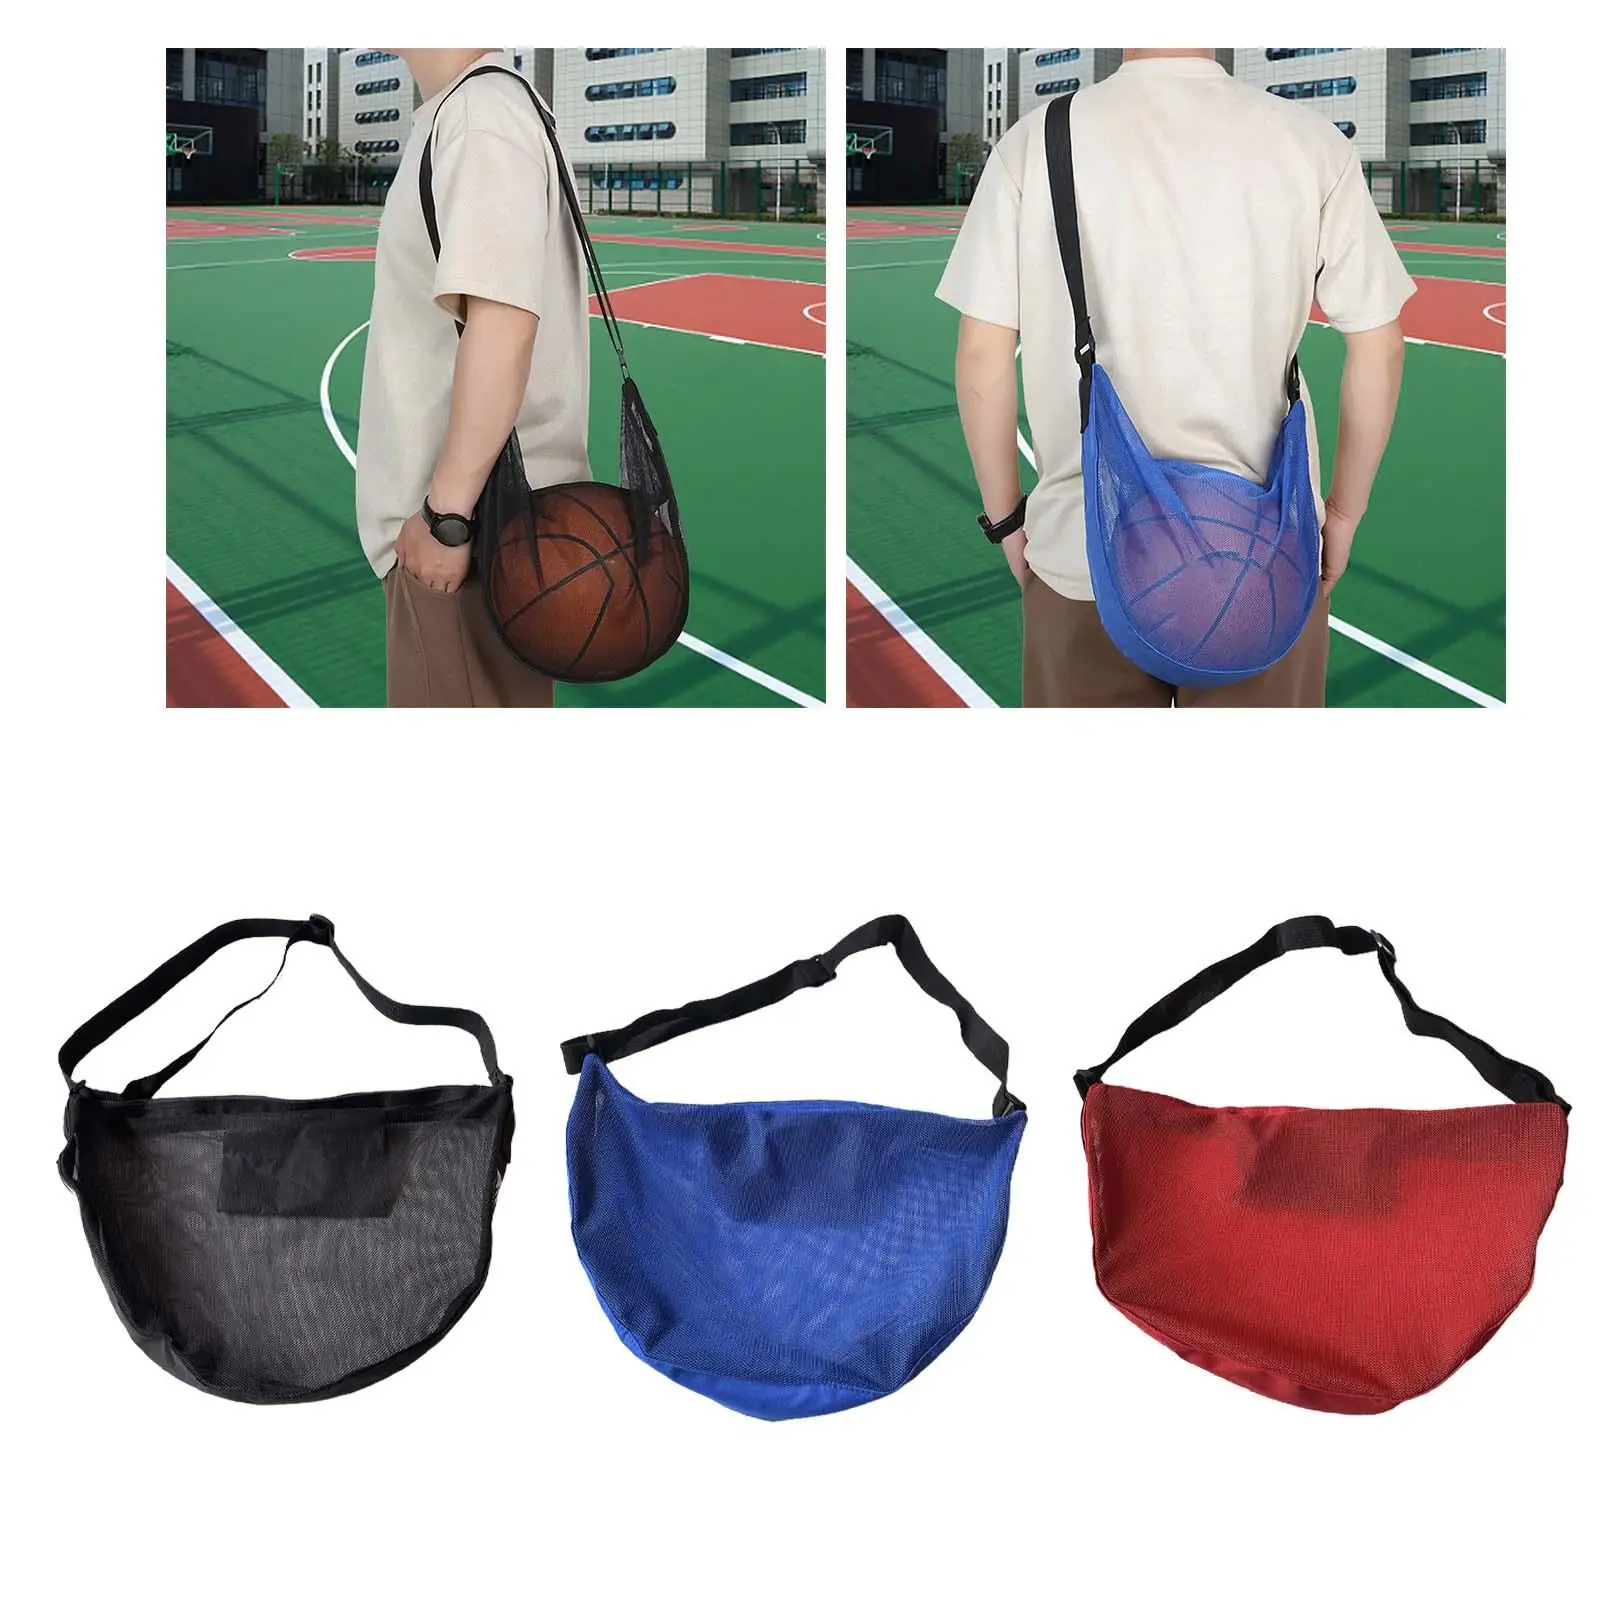 Ball Bags Mesh with Shoulder Strap Equipment Lightweight Basketball Carry Bag for Garage Outdoor Sports Training Soccer Exercise